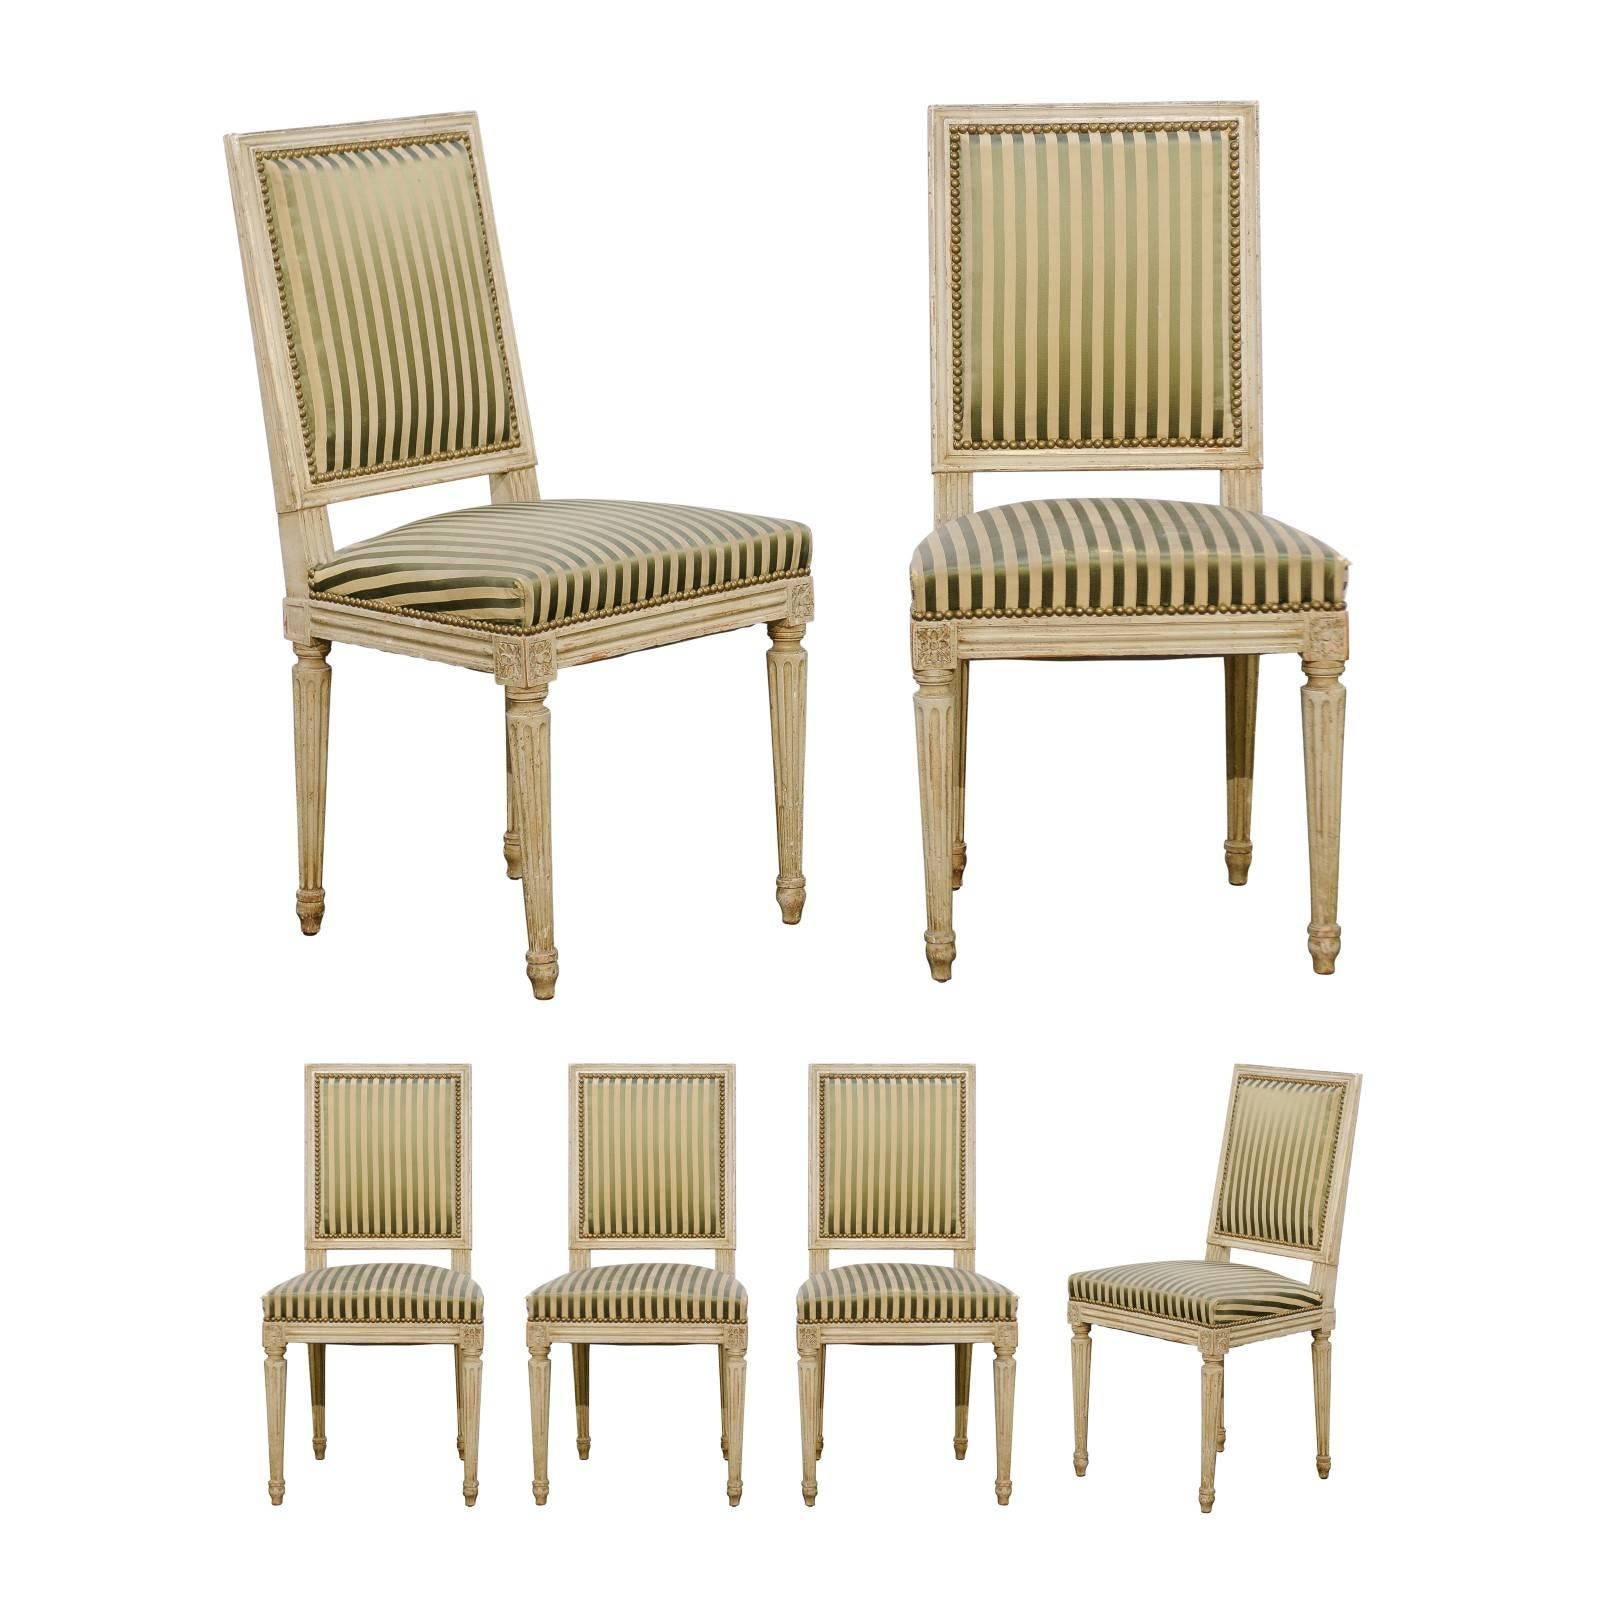 Set of Six French Louis XVI Style Painted Wood Dining Chairs, circa 1900